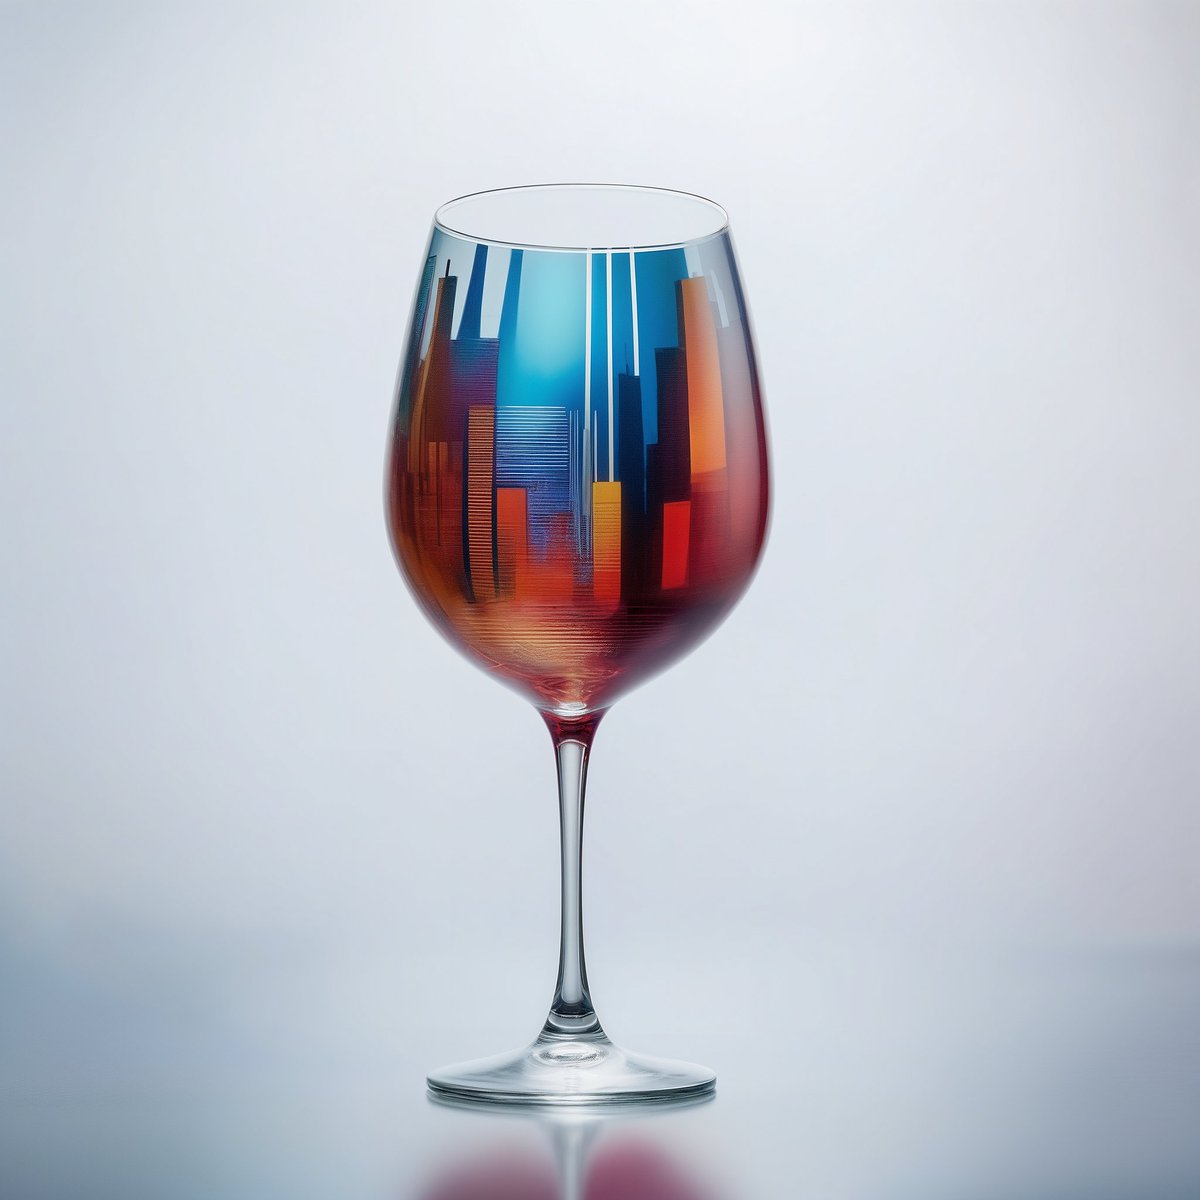 QT with your Inside a Wine Glass art

Retrofuturism in a wine glass